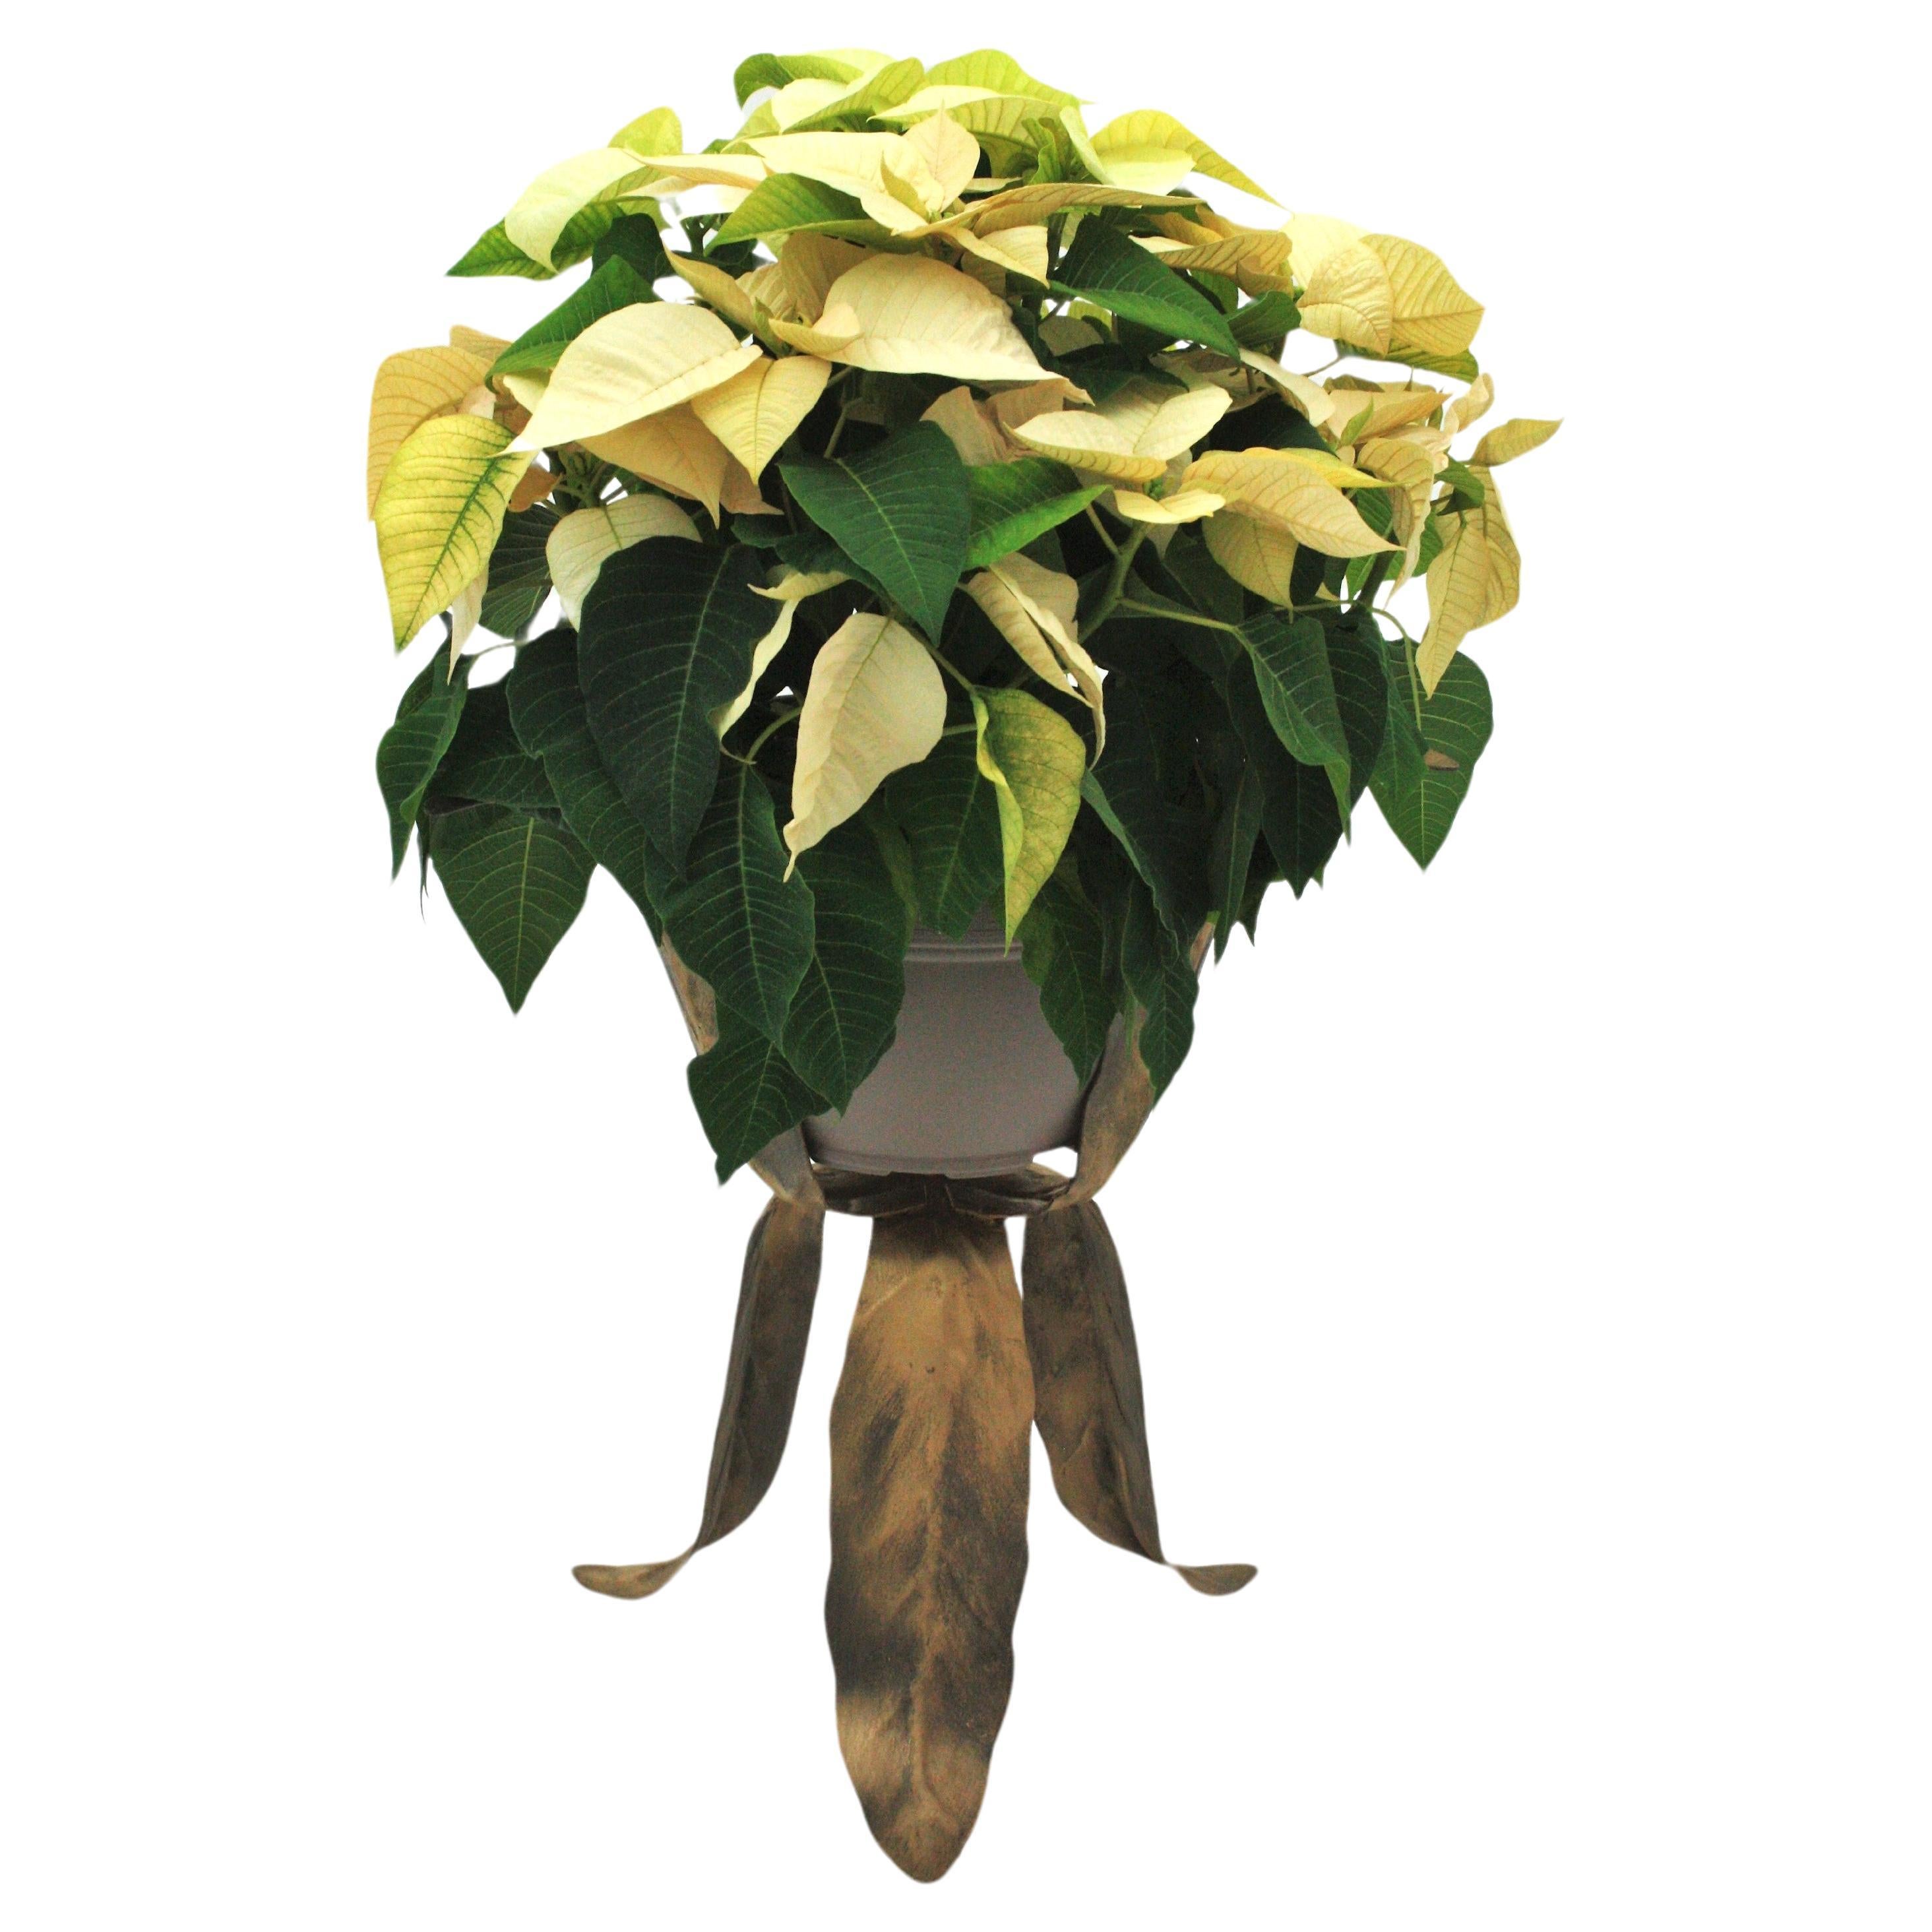 Leafed Tripod Planter / Jardinière in Patinated Metal.
Manufactured at the Mid-Century Modern period, Spain, 1950-1960.
Nice design with three leaves standing up on a tripod leafed base. Original gilt patinated finish.
Beautiful placed alone or with